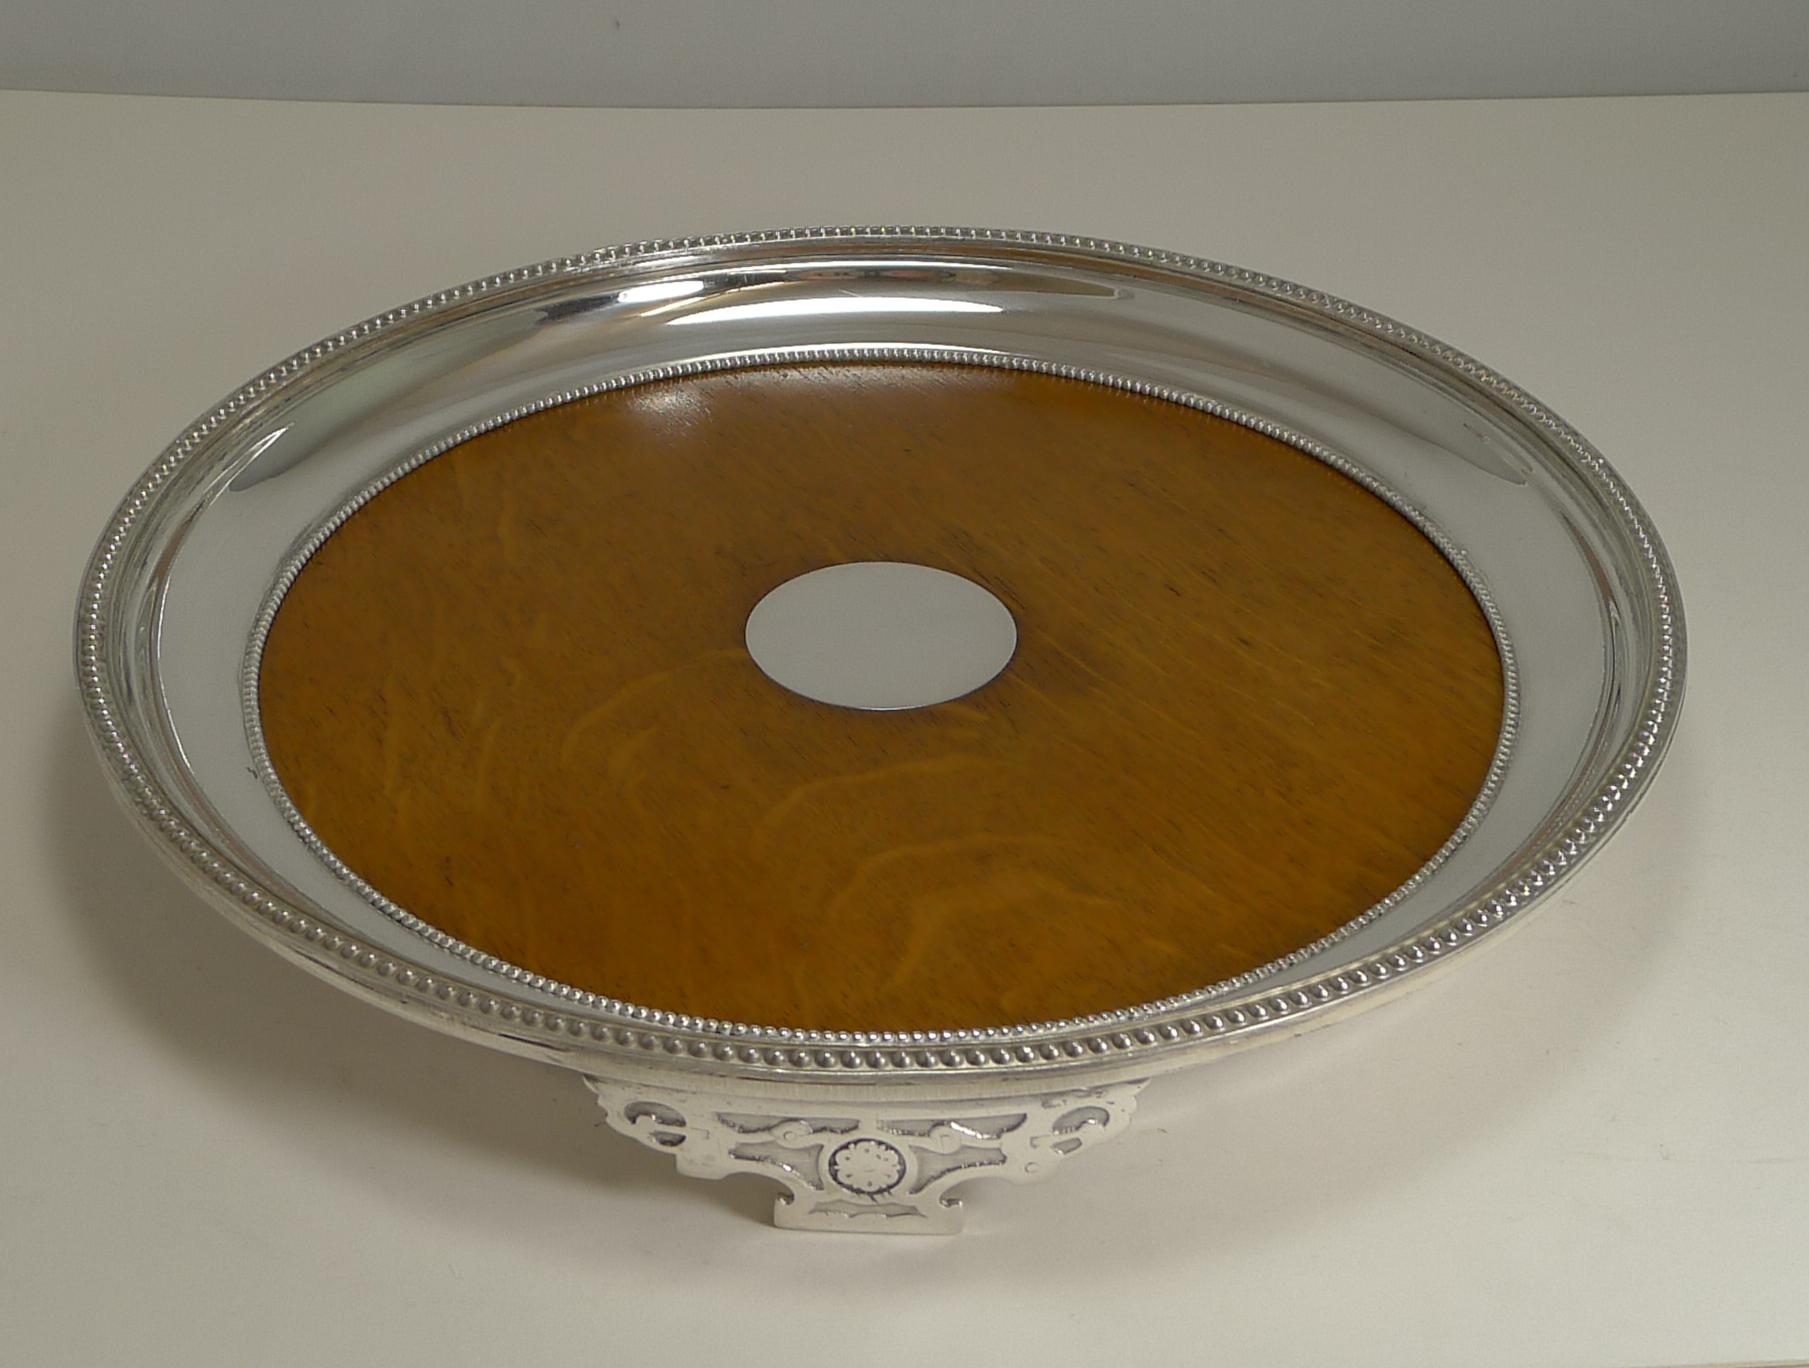 A rare circular oak and silver plated tray, unusual, you just don't come across circular examples and early examples like this.

The underside is lucky enough to have an English design registration lozenge which we can date to 17th October